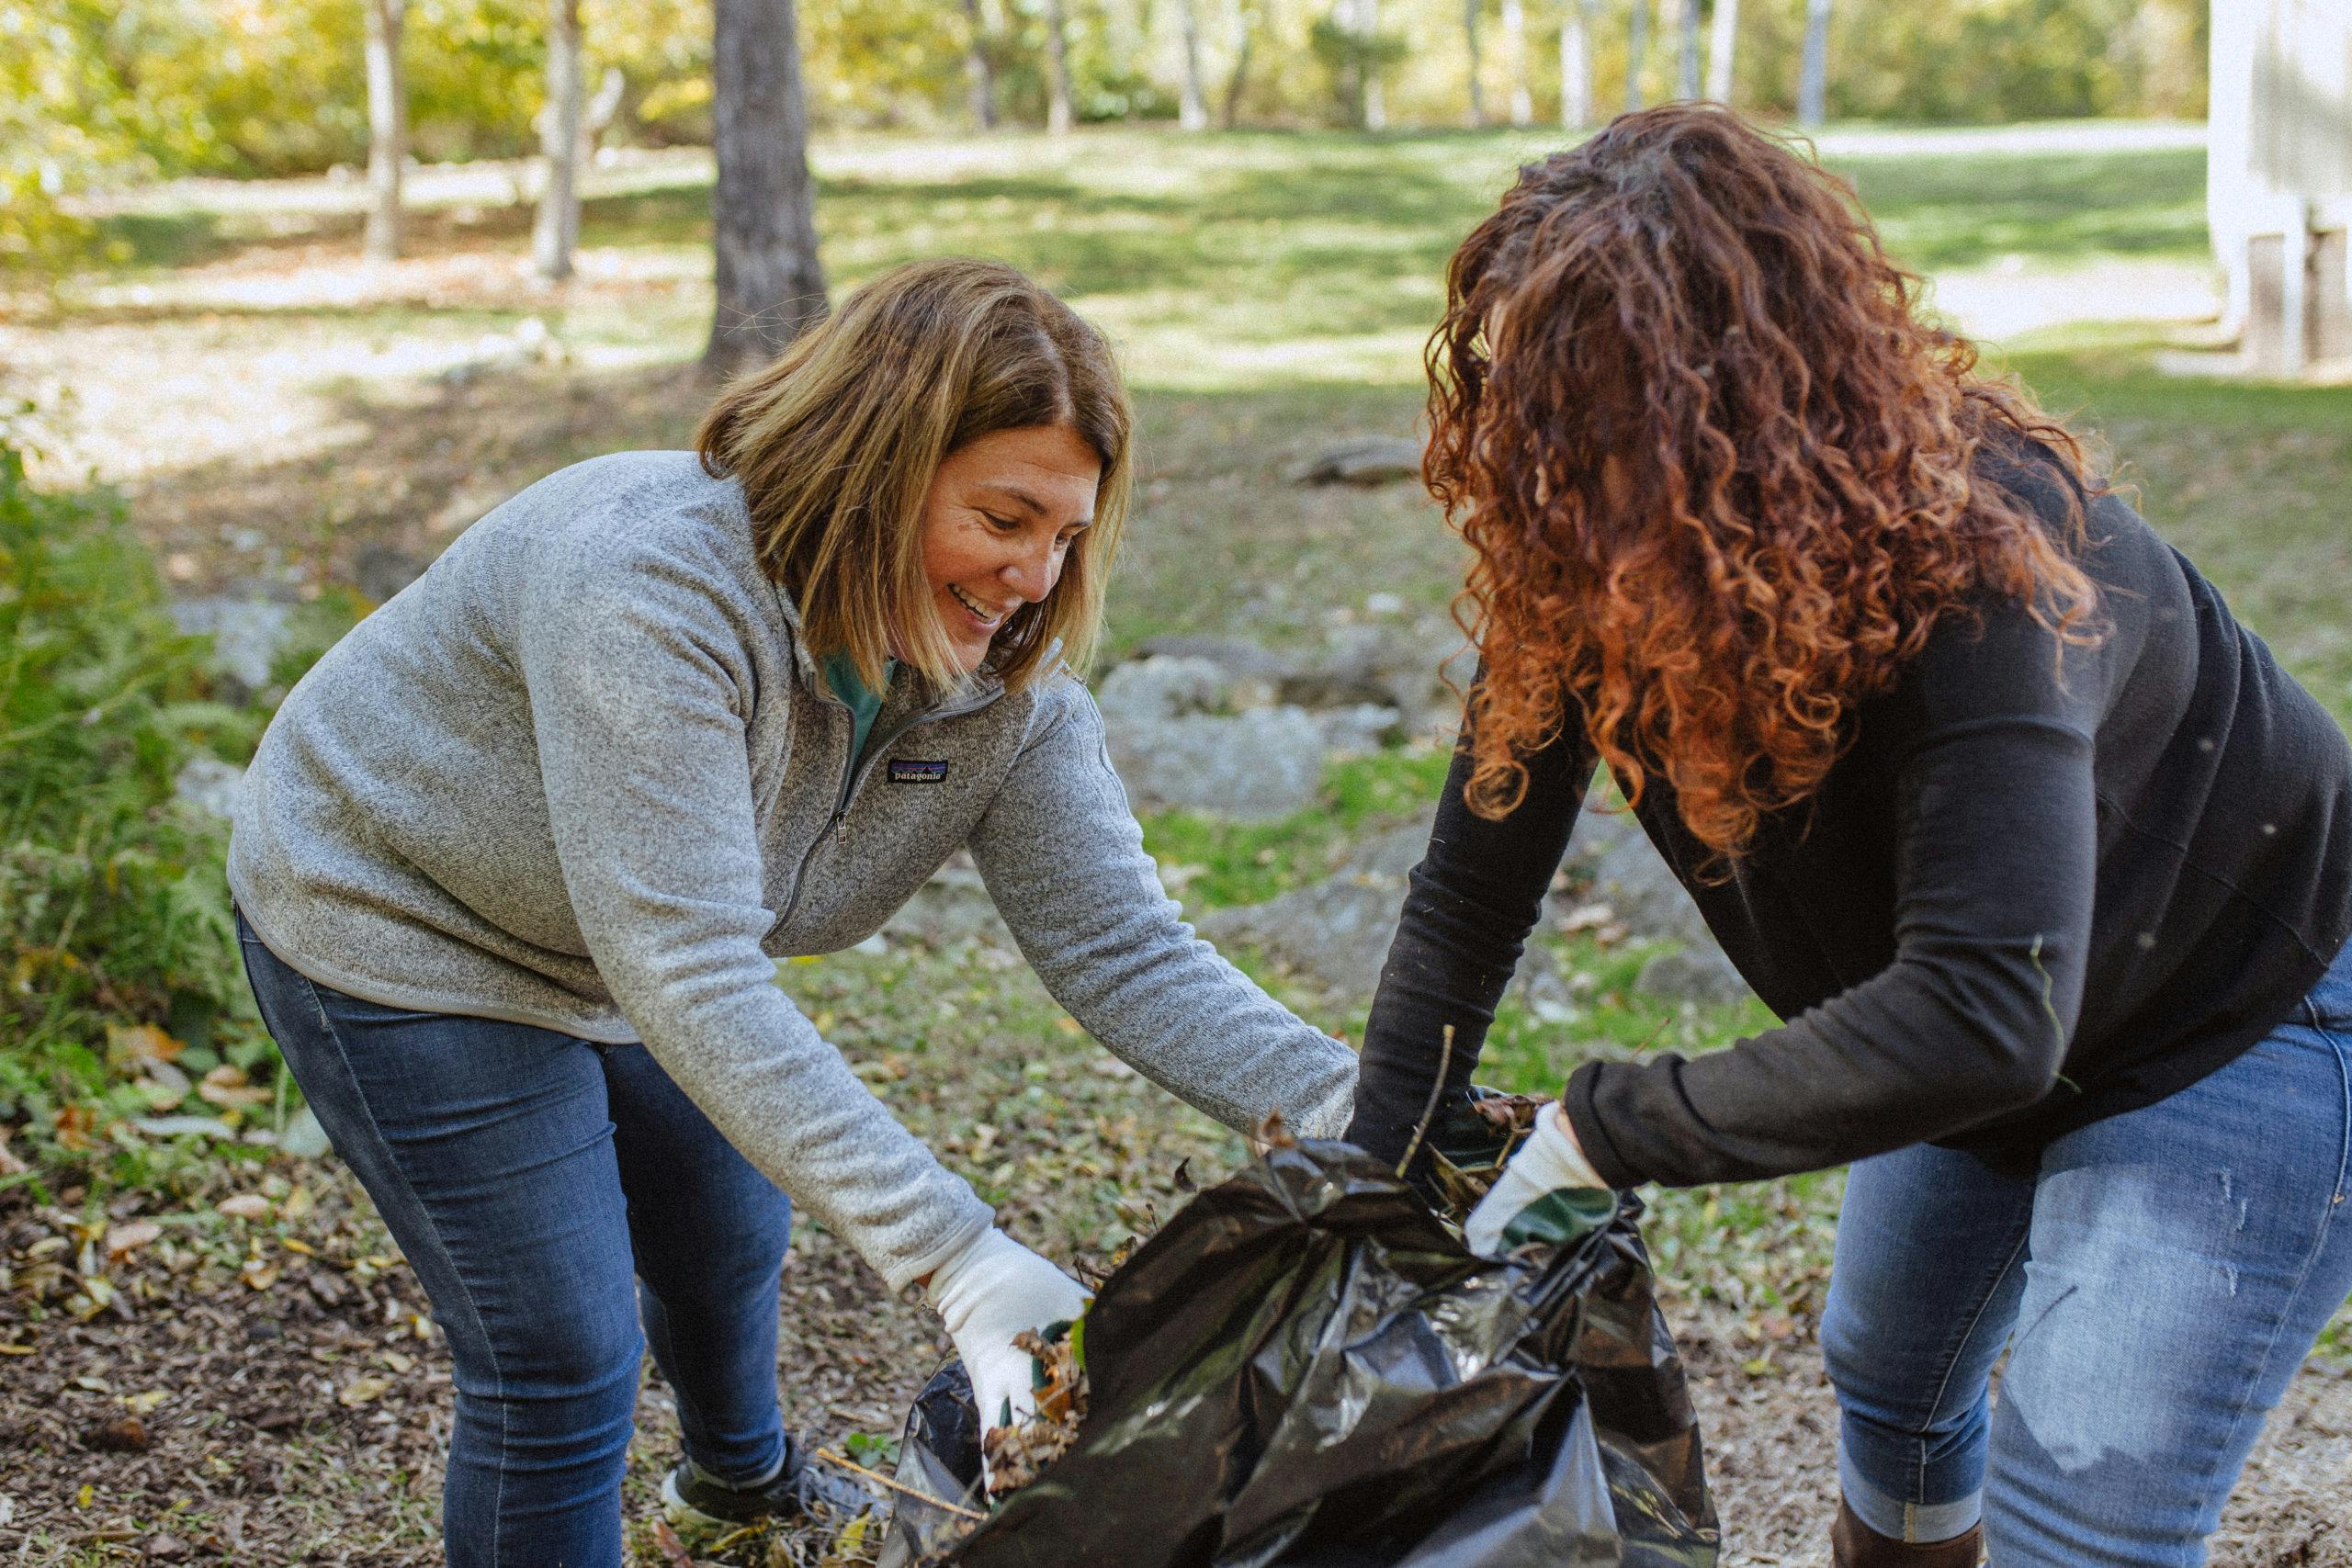 Image of two women gathering fall leaves in a trash bag together.